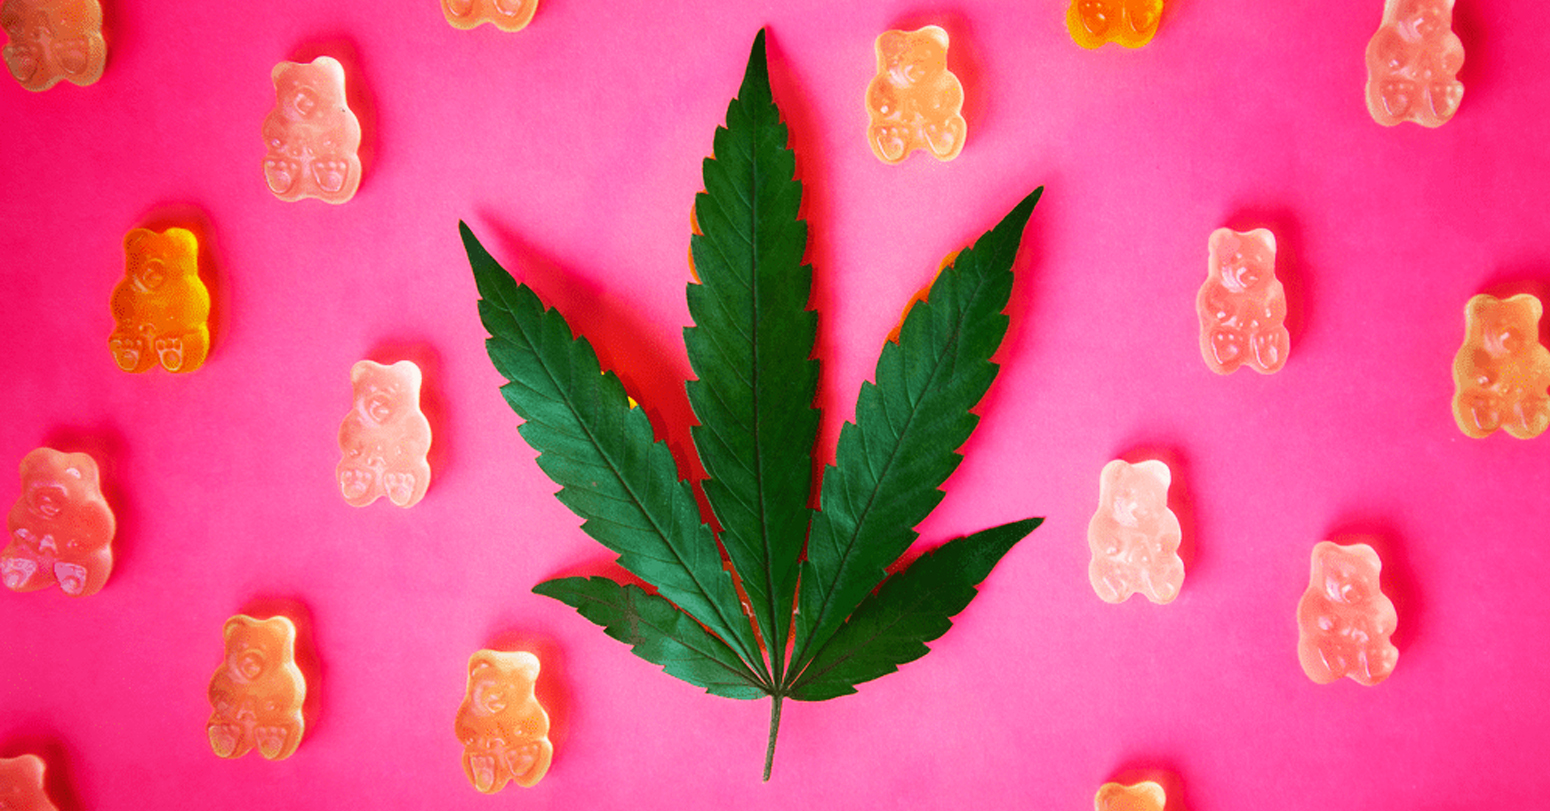 Flavored cannabis marketing is criticized for targeting kids